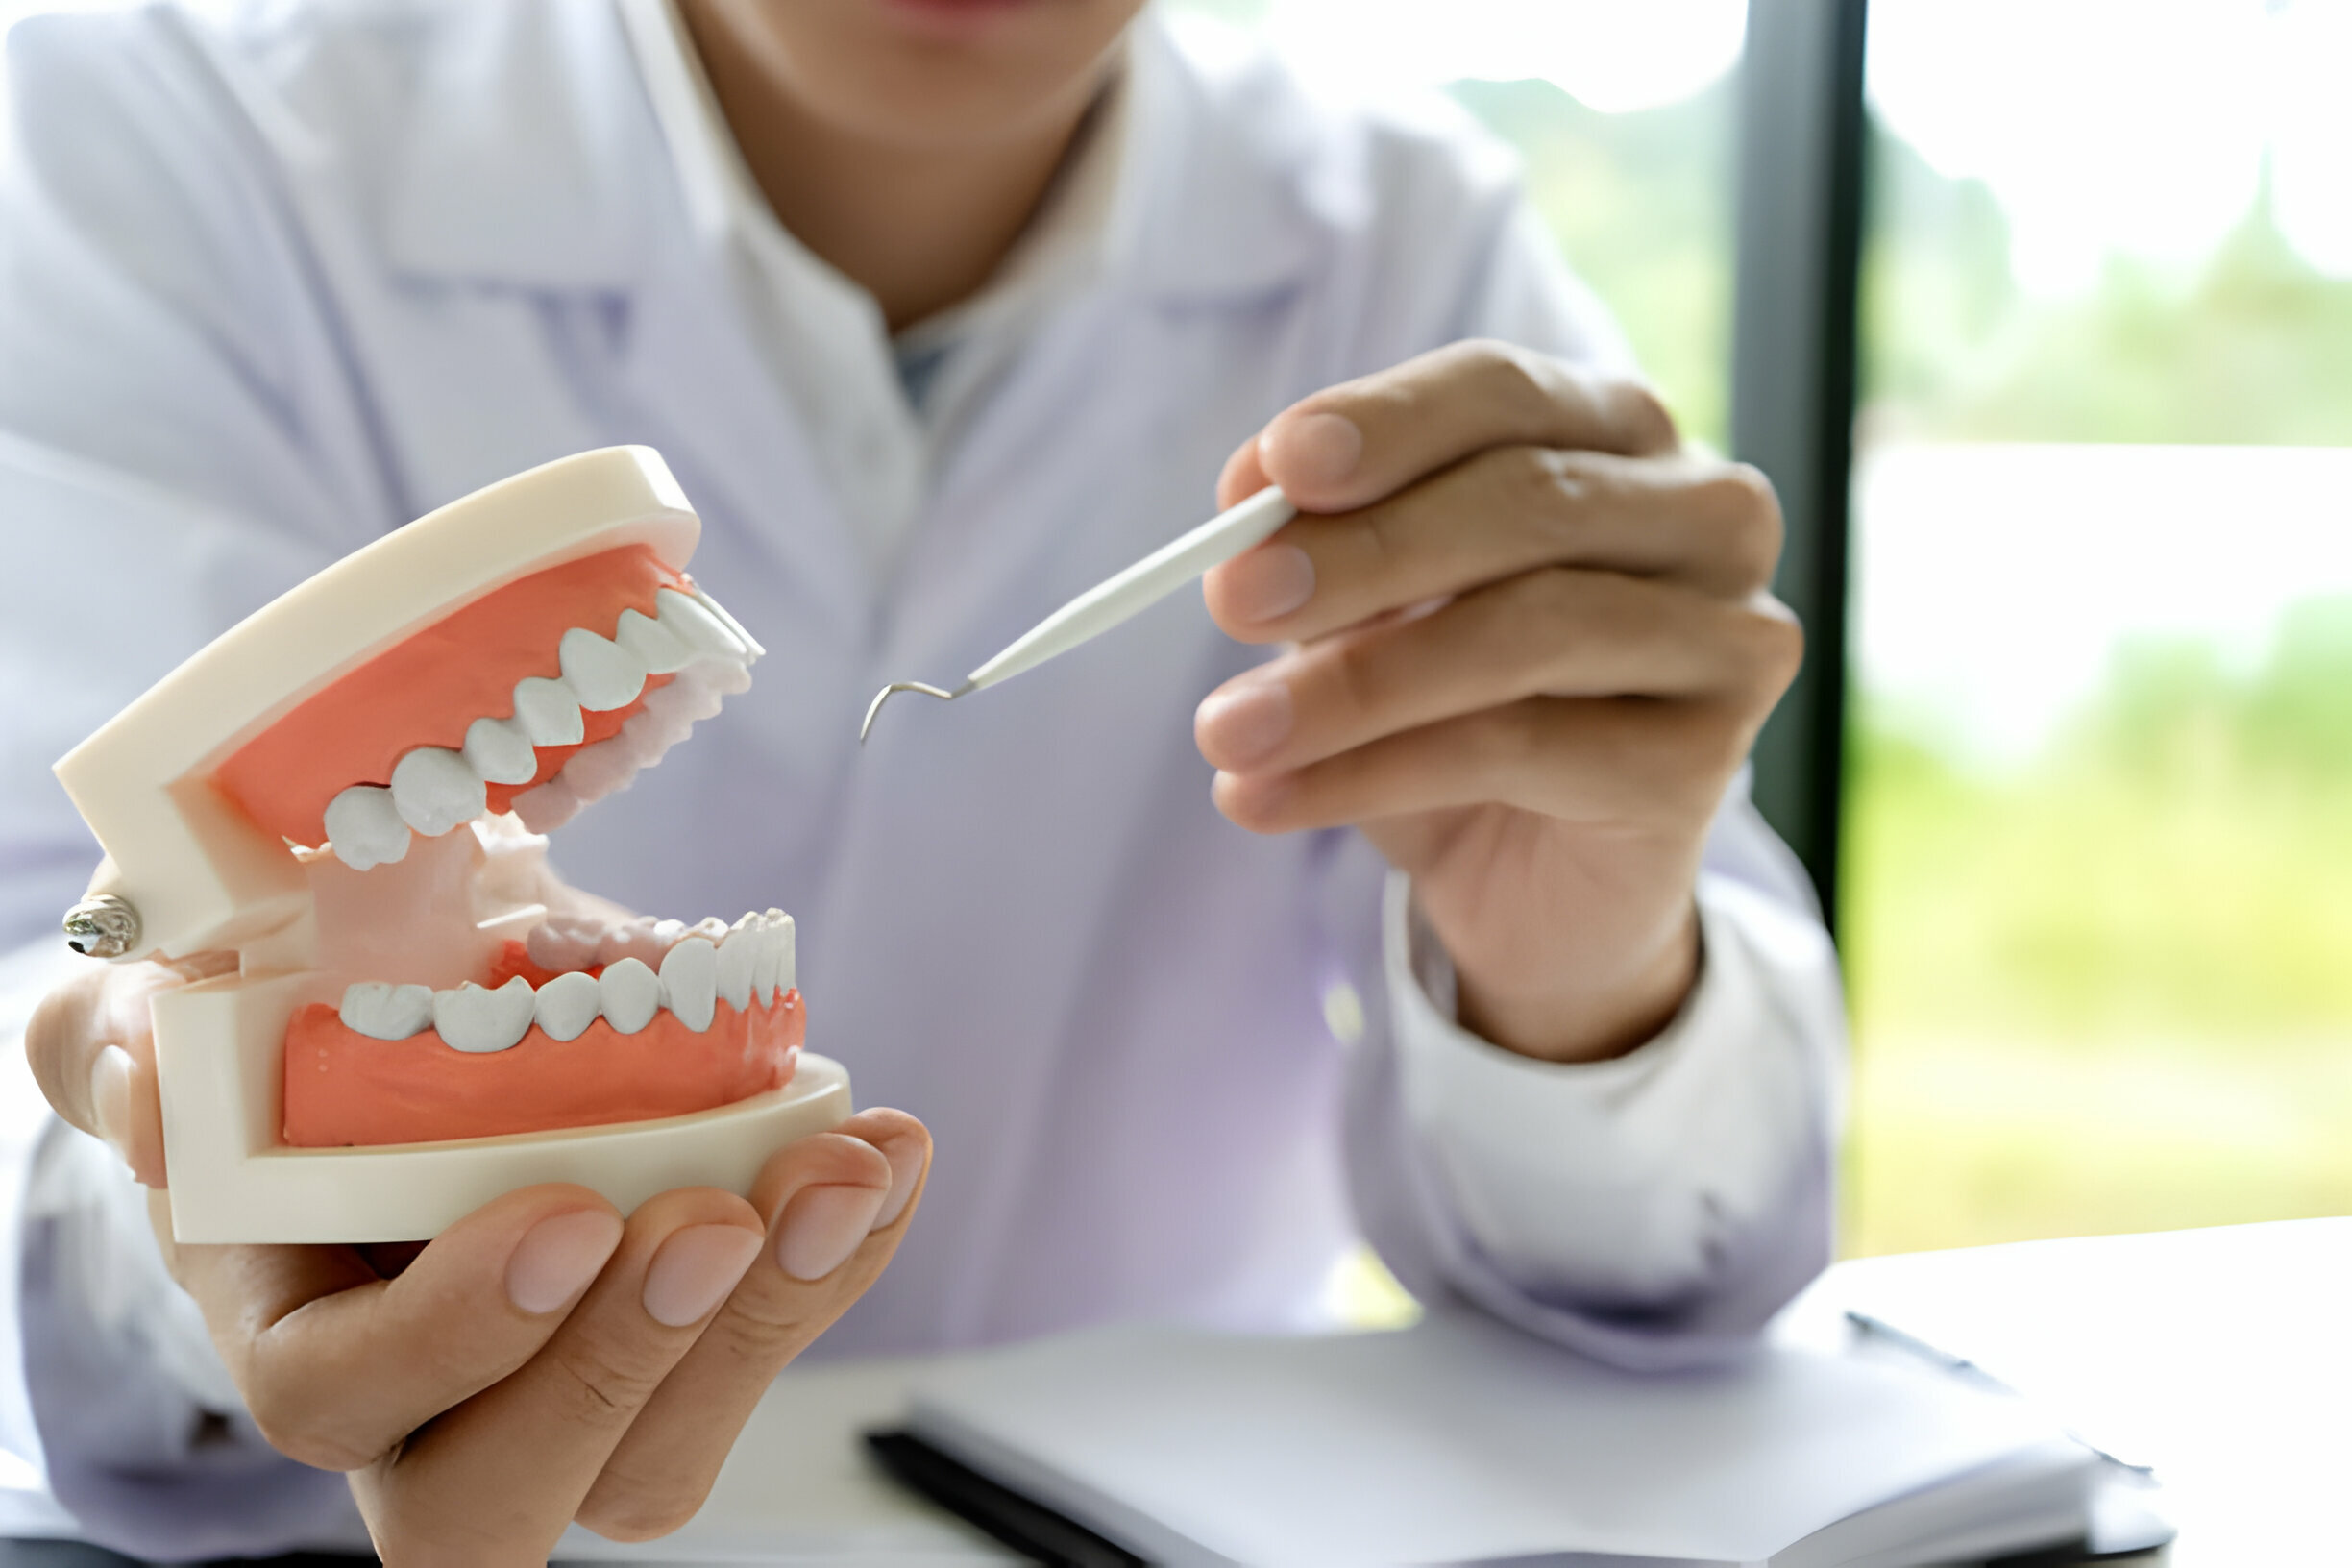 The Truth About Dentures: What No One Tells You_3